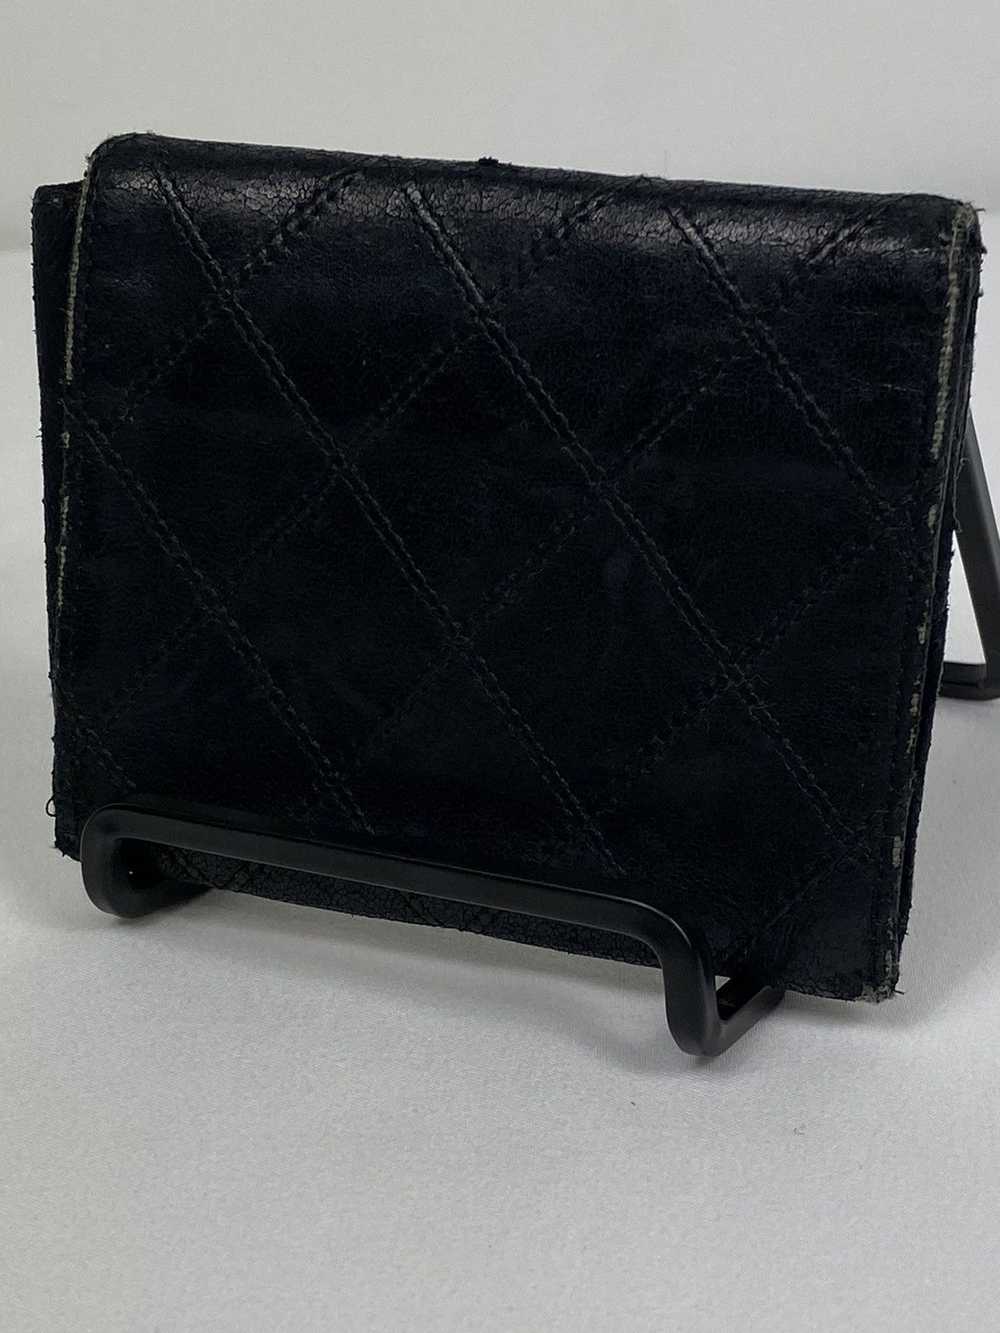 Chanel Chanel CC Quilted coin purse - image 4